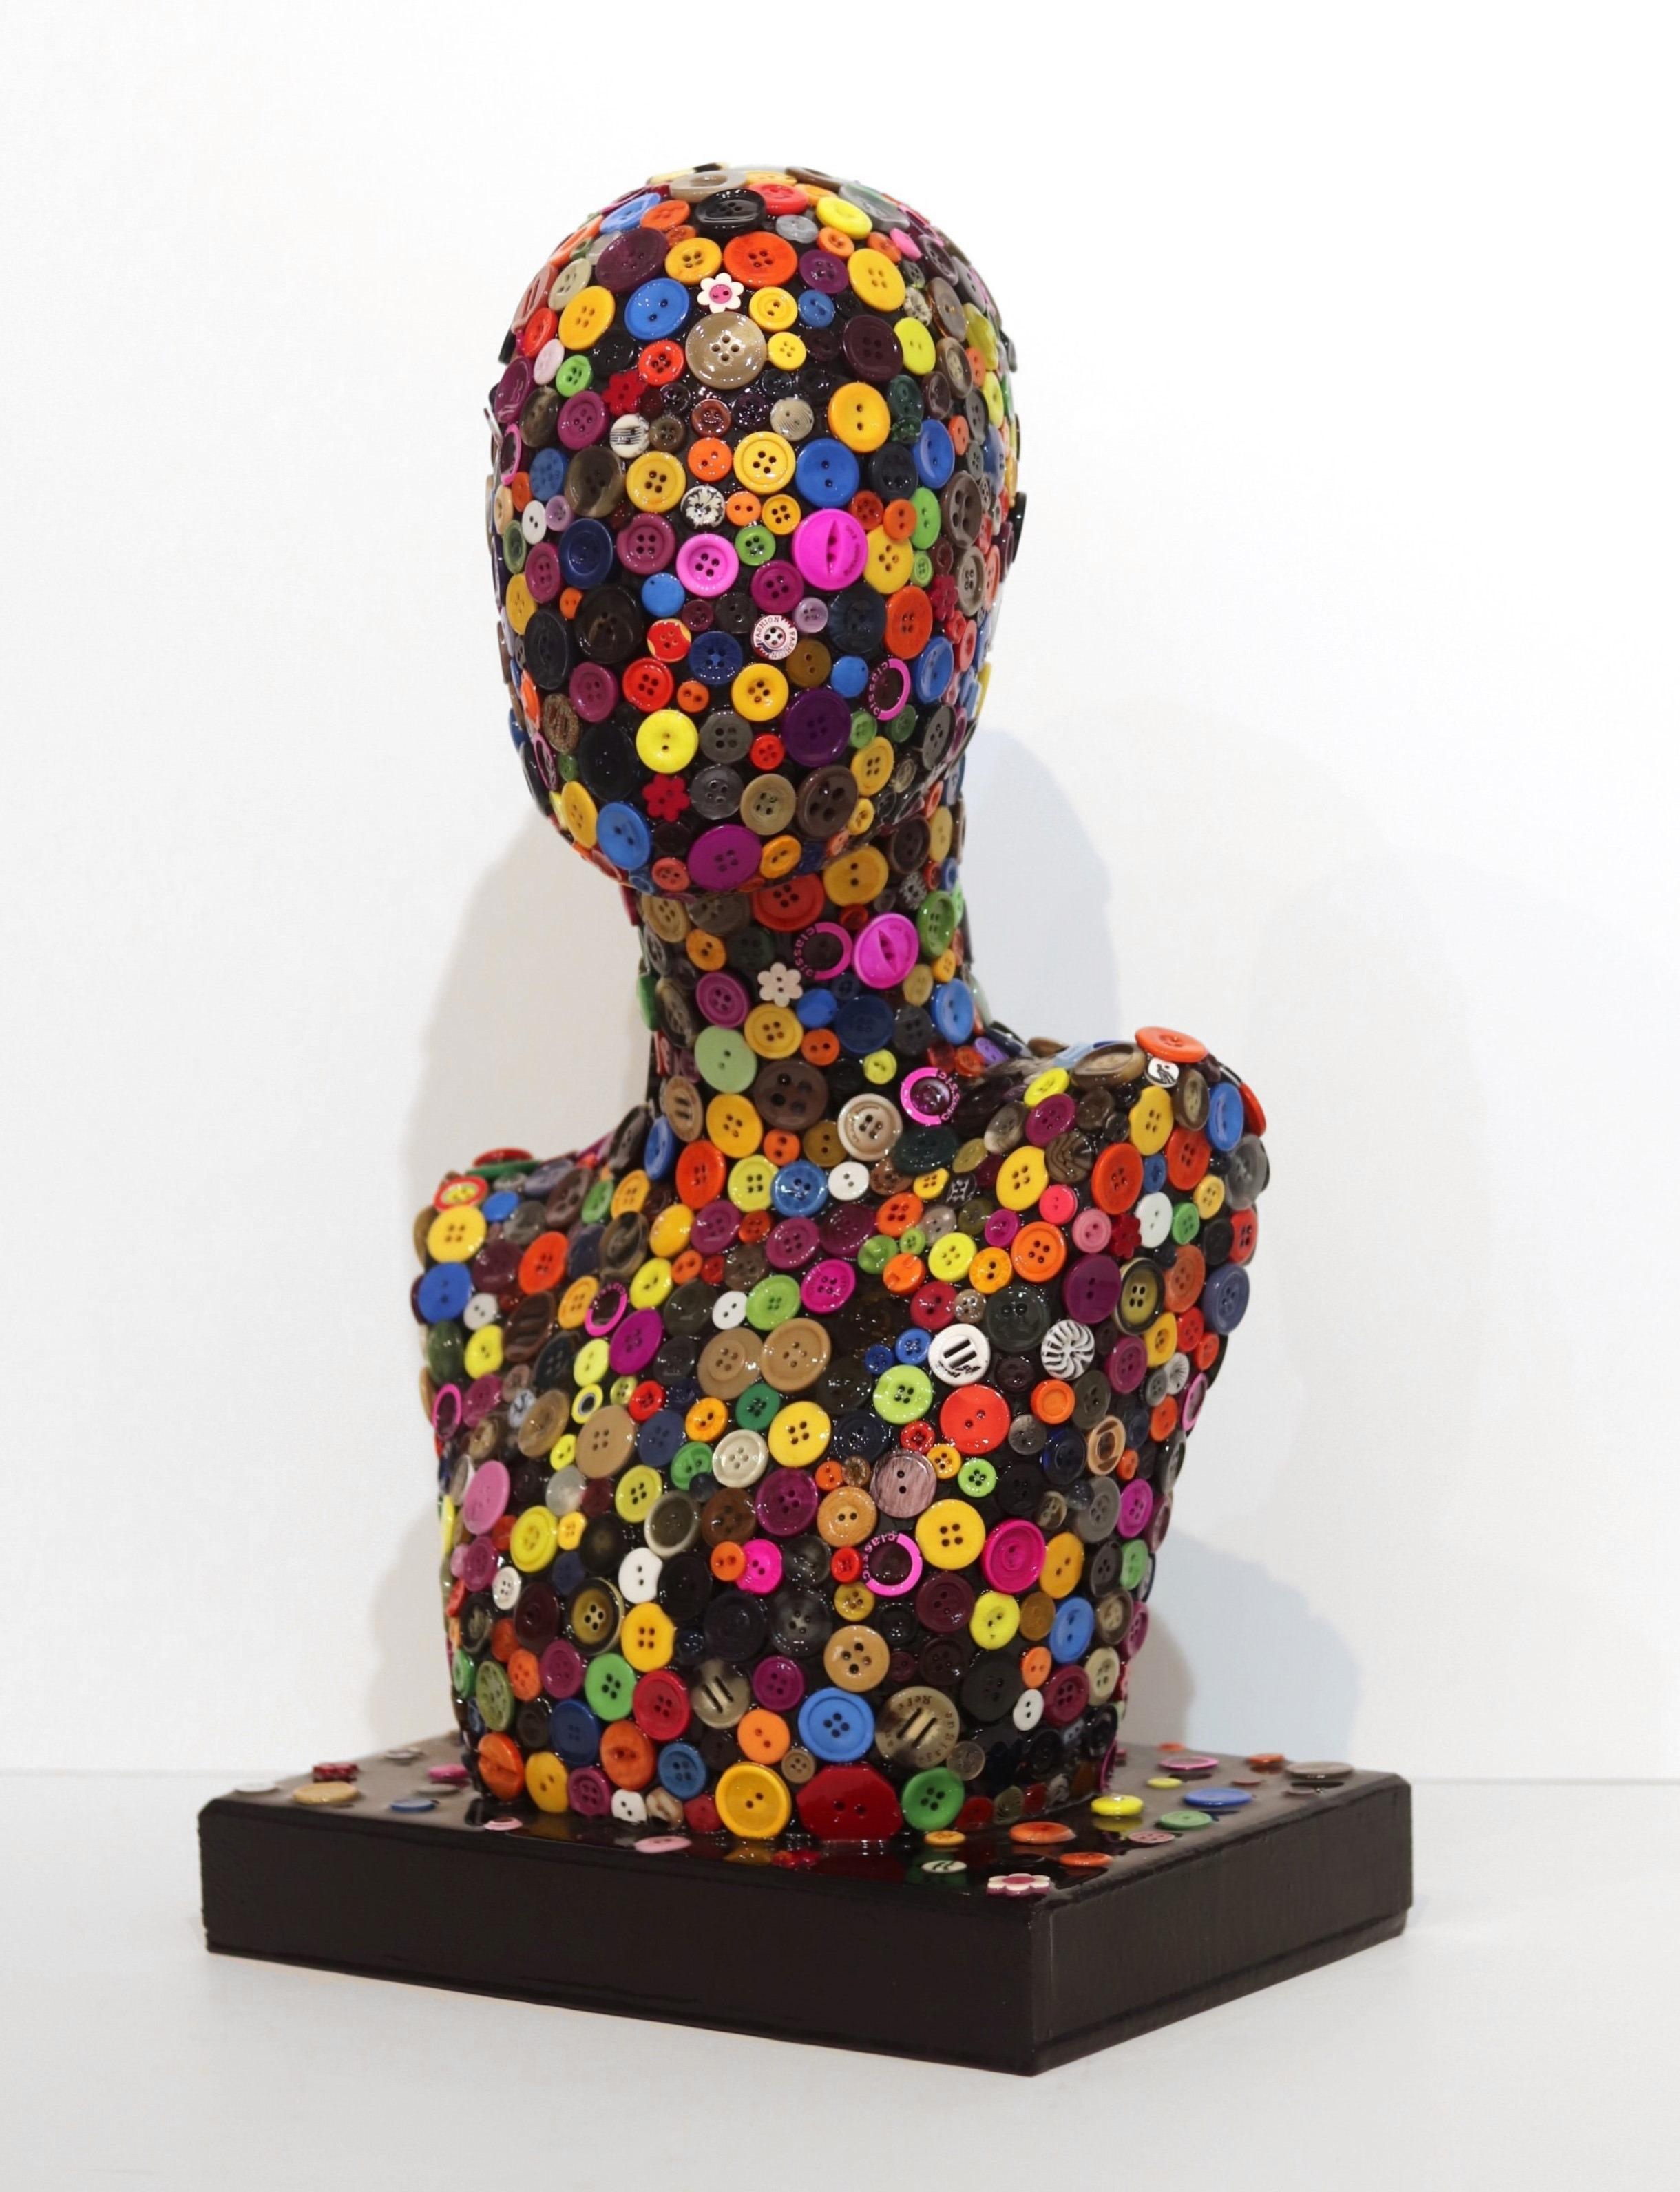 Fashionista II - Colorful Mixed Media Sculptural Artwork - Contemporary Sculpture by Mauro Oliveira